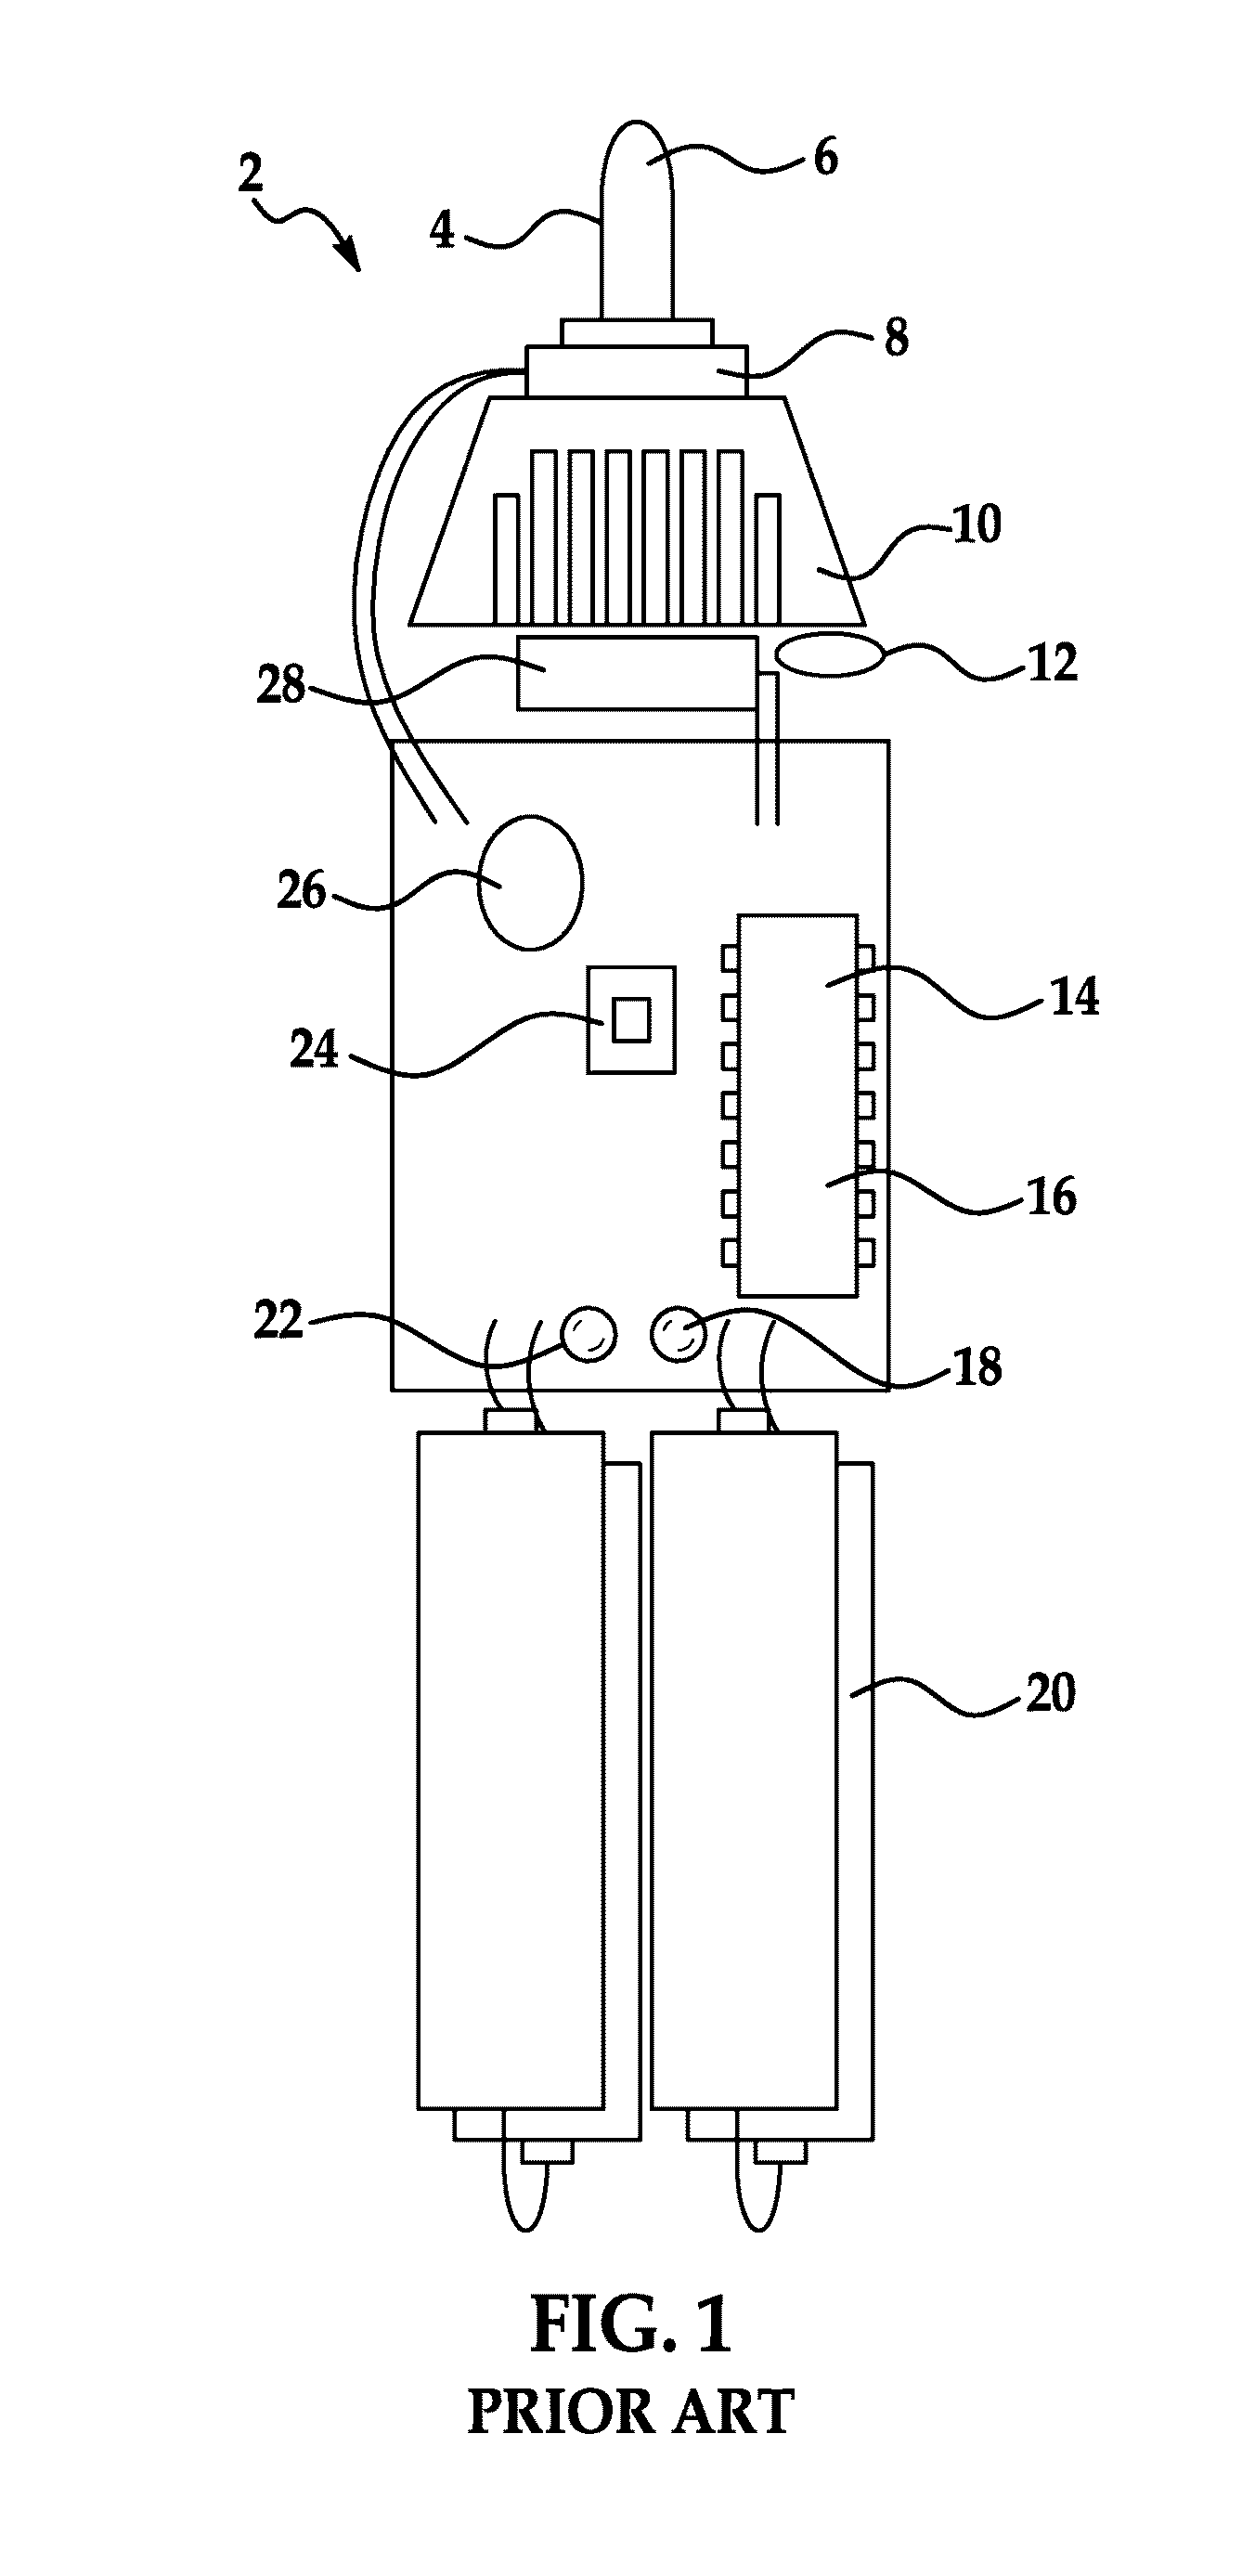 Stimulation system, device, and method for use thereof